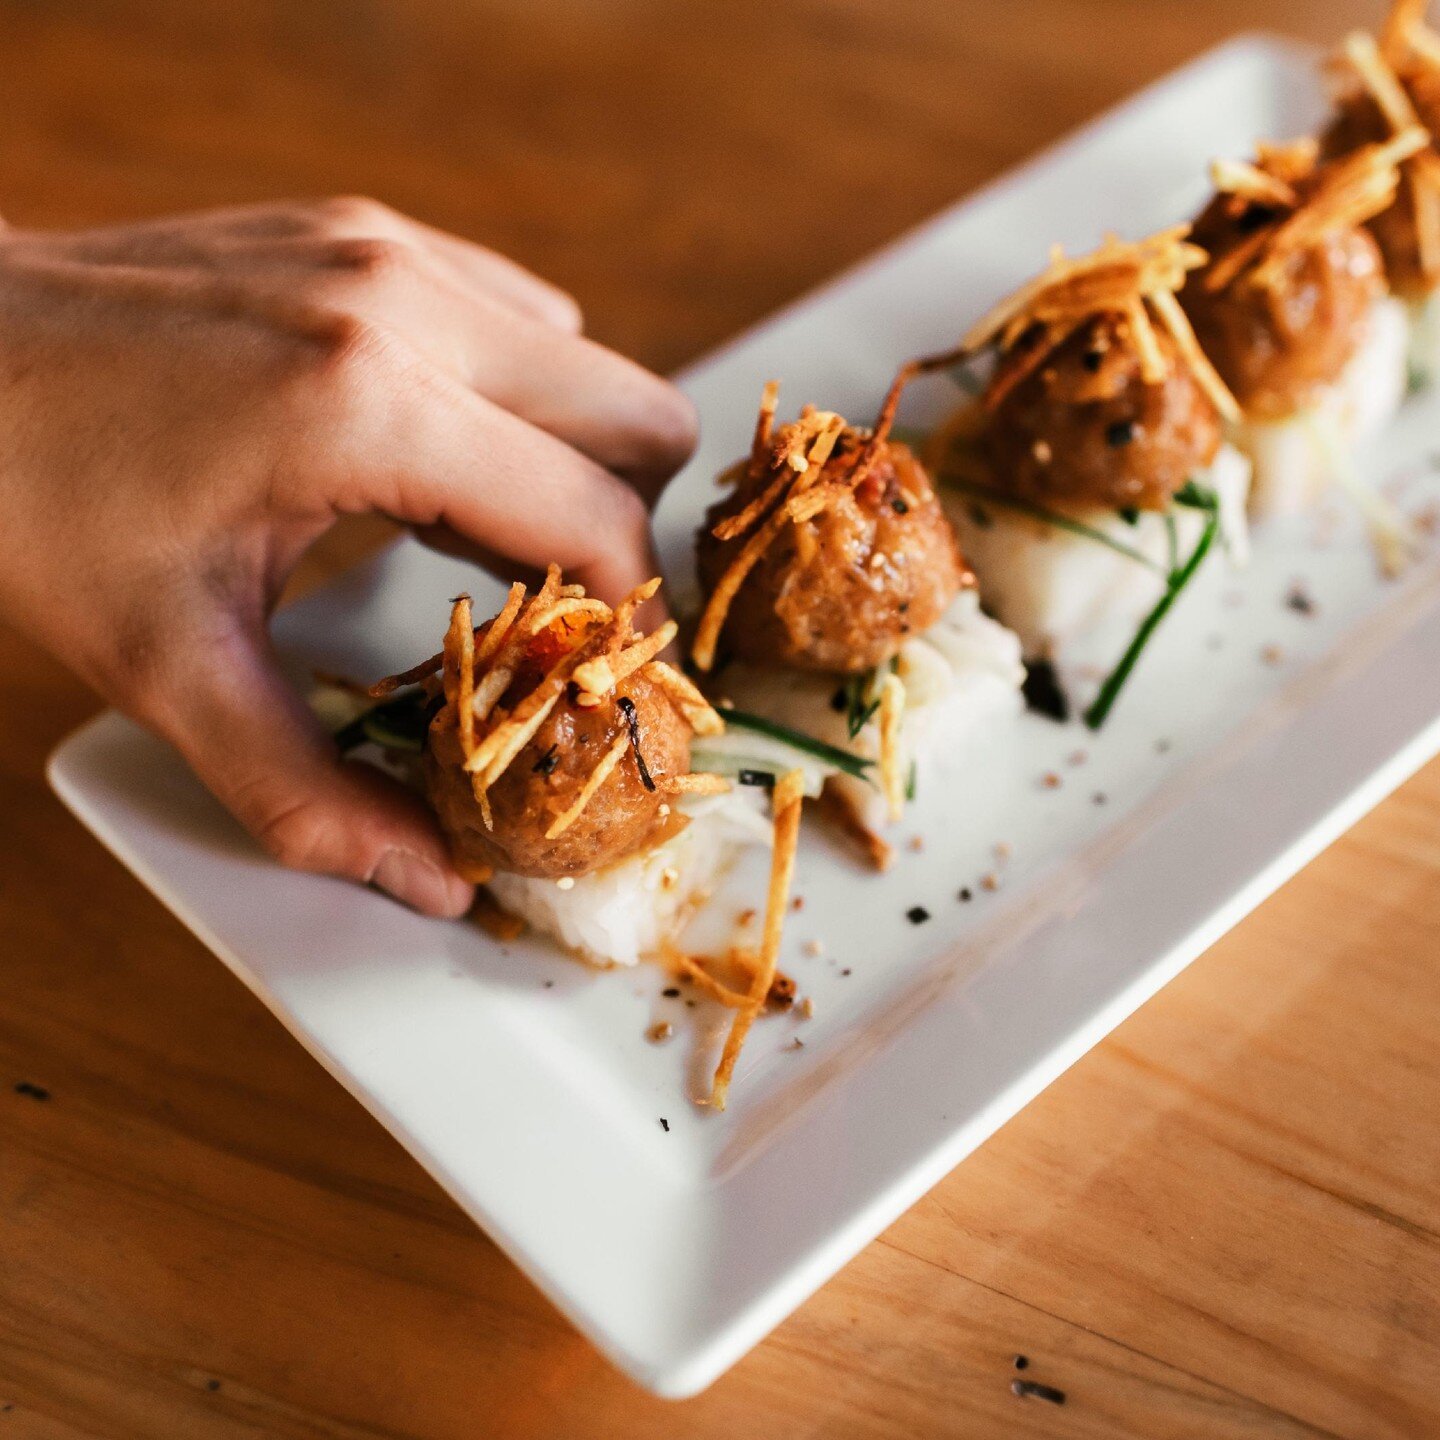 Get ready to spice things up with the Spicy Tuna Bites at STIR! Made with fresh sushi rice, cucumbers, furikake, sriracha wonton crisps, and pineapple sweet chili sauce, this dish is the ultimate fusion of flavors.
.
.
.
.
. 
#food #foodie #instafood